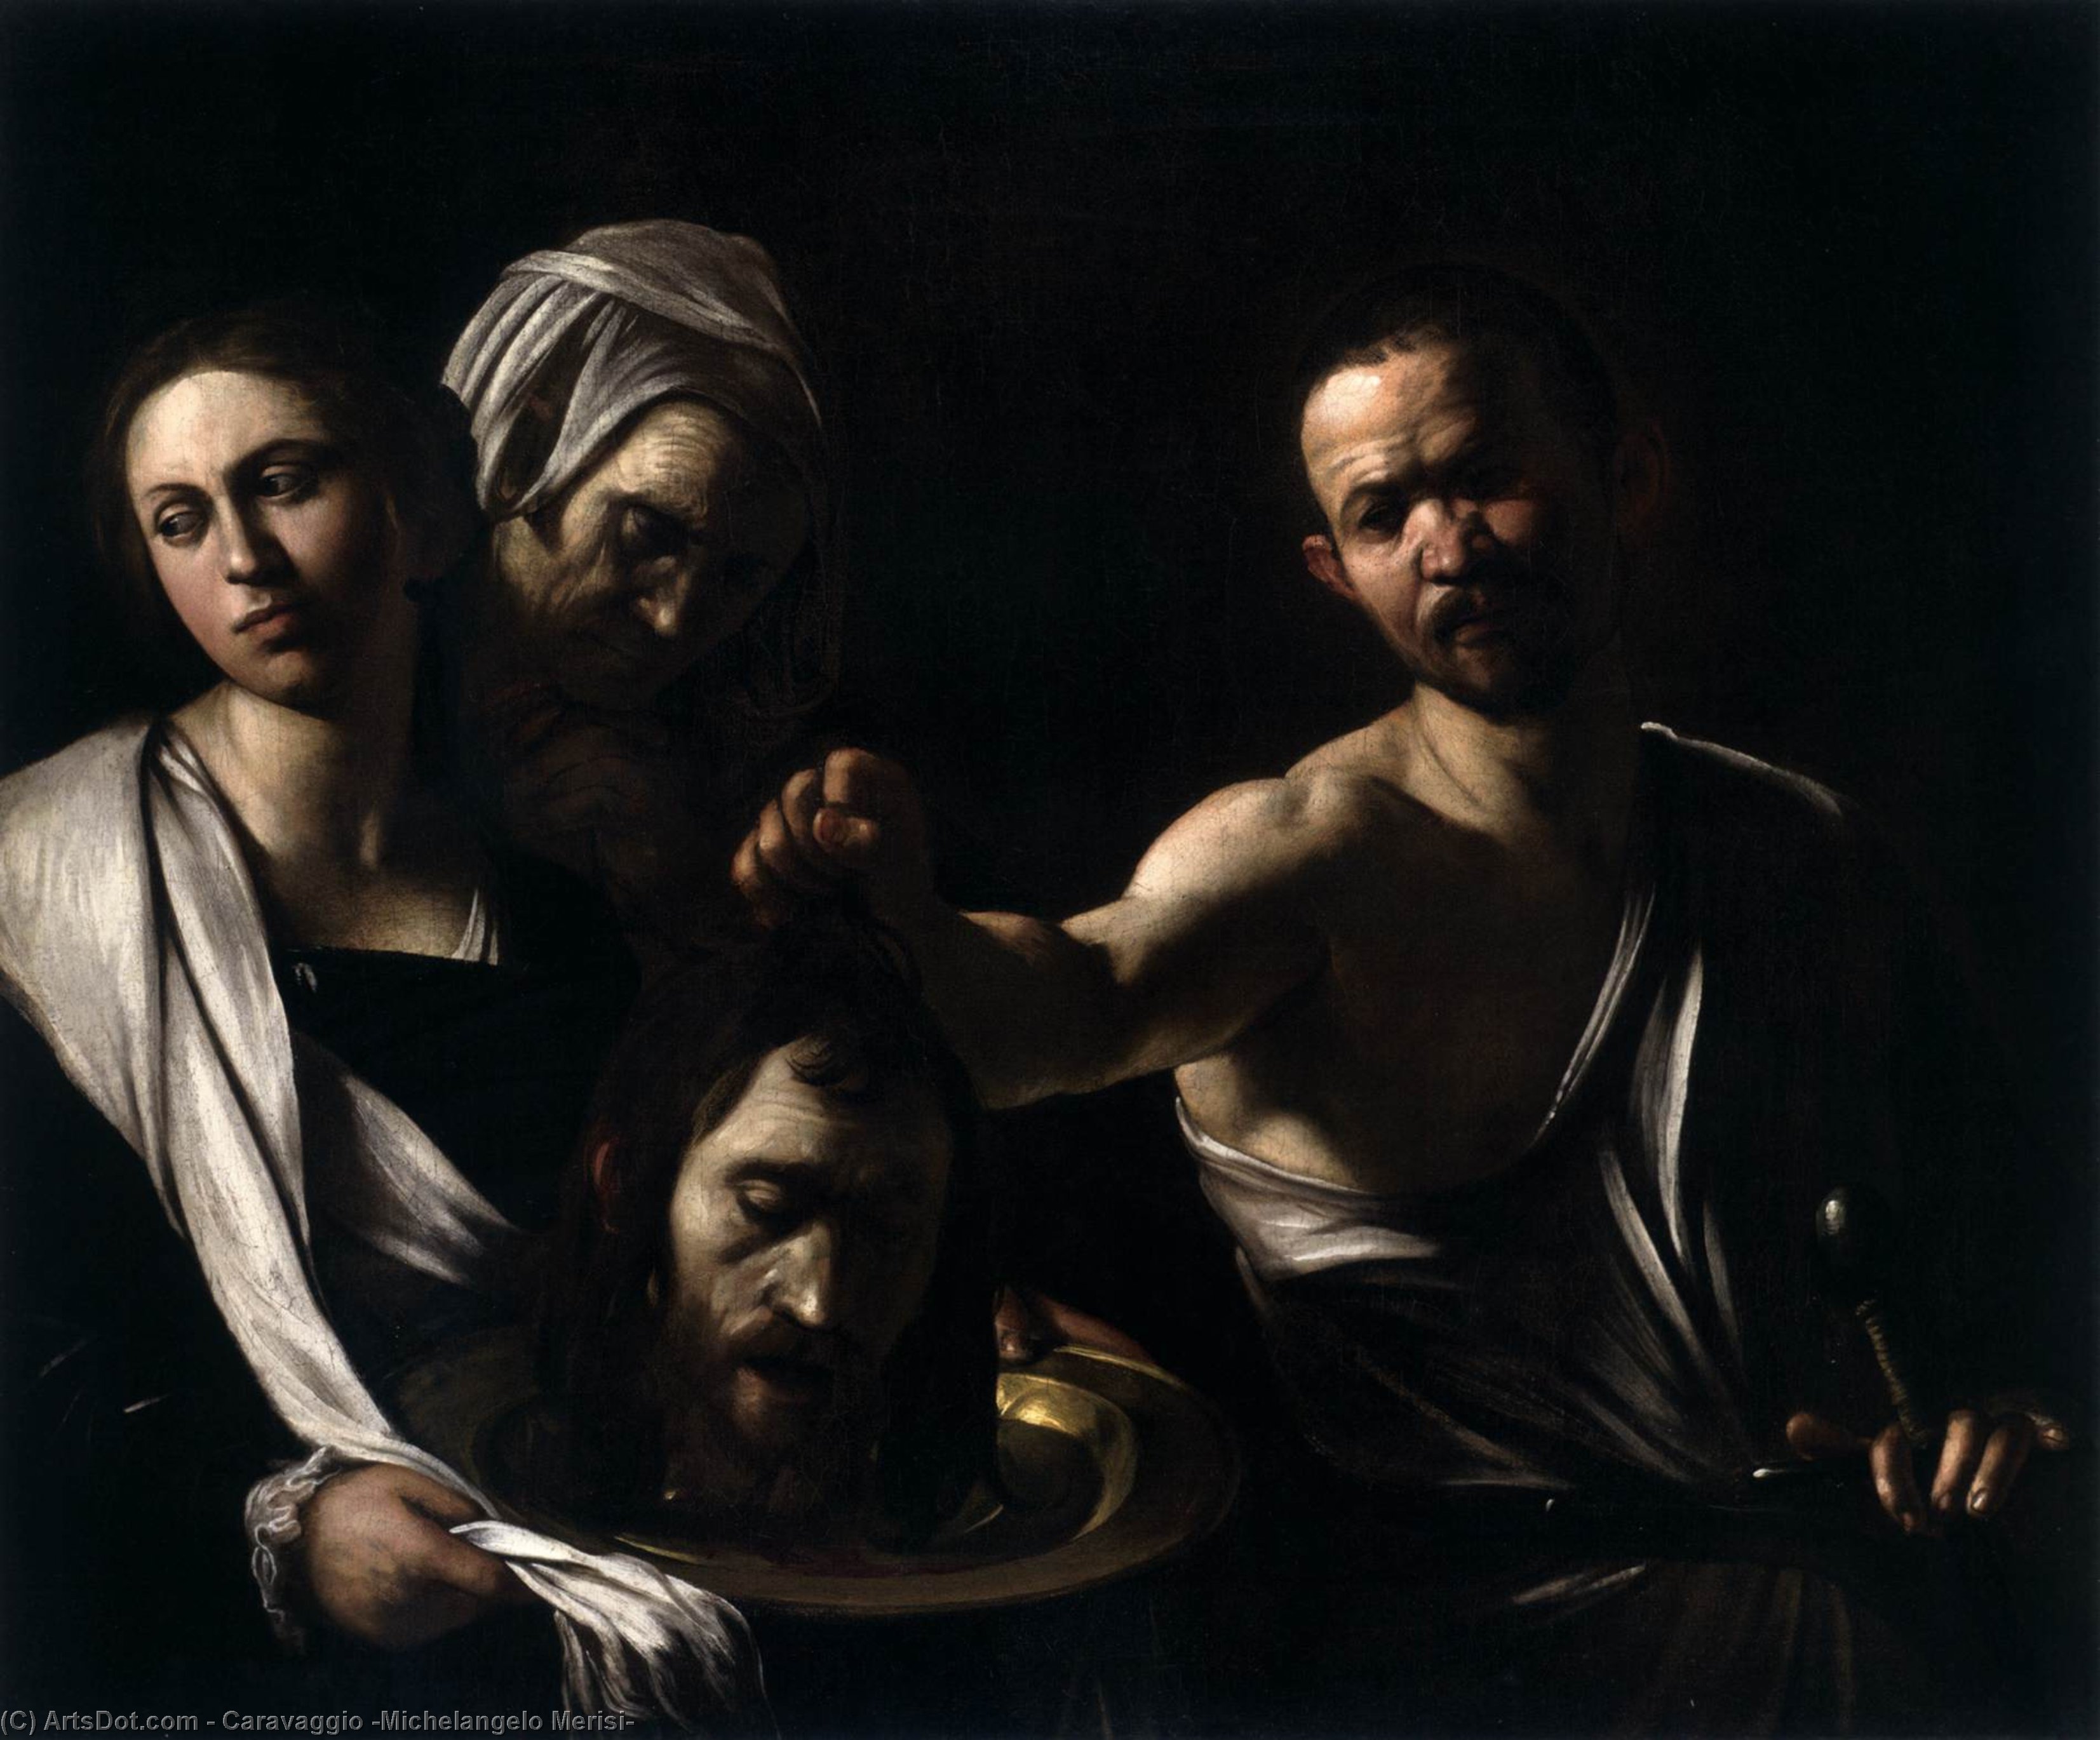 Buy Museum Art Reproductions Salome with the Head of St. John the Baptist, 1607 by Caravaggio (Michelangelo Merisi) (1571-1610, Spain) | ArtsDot.com